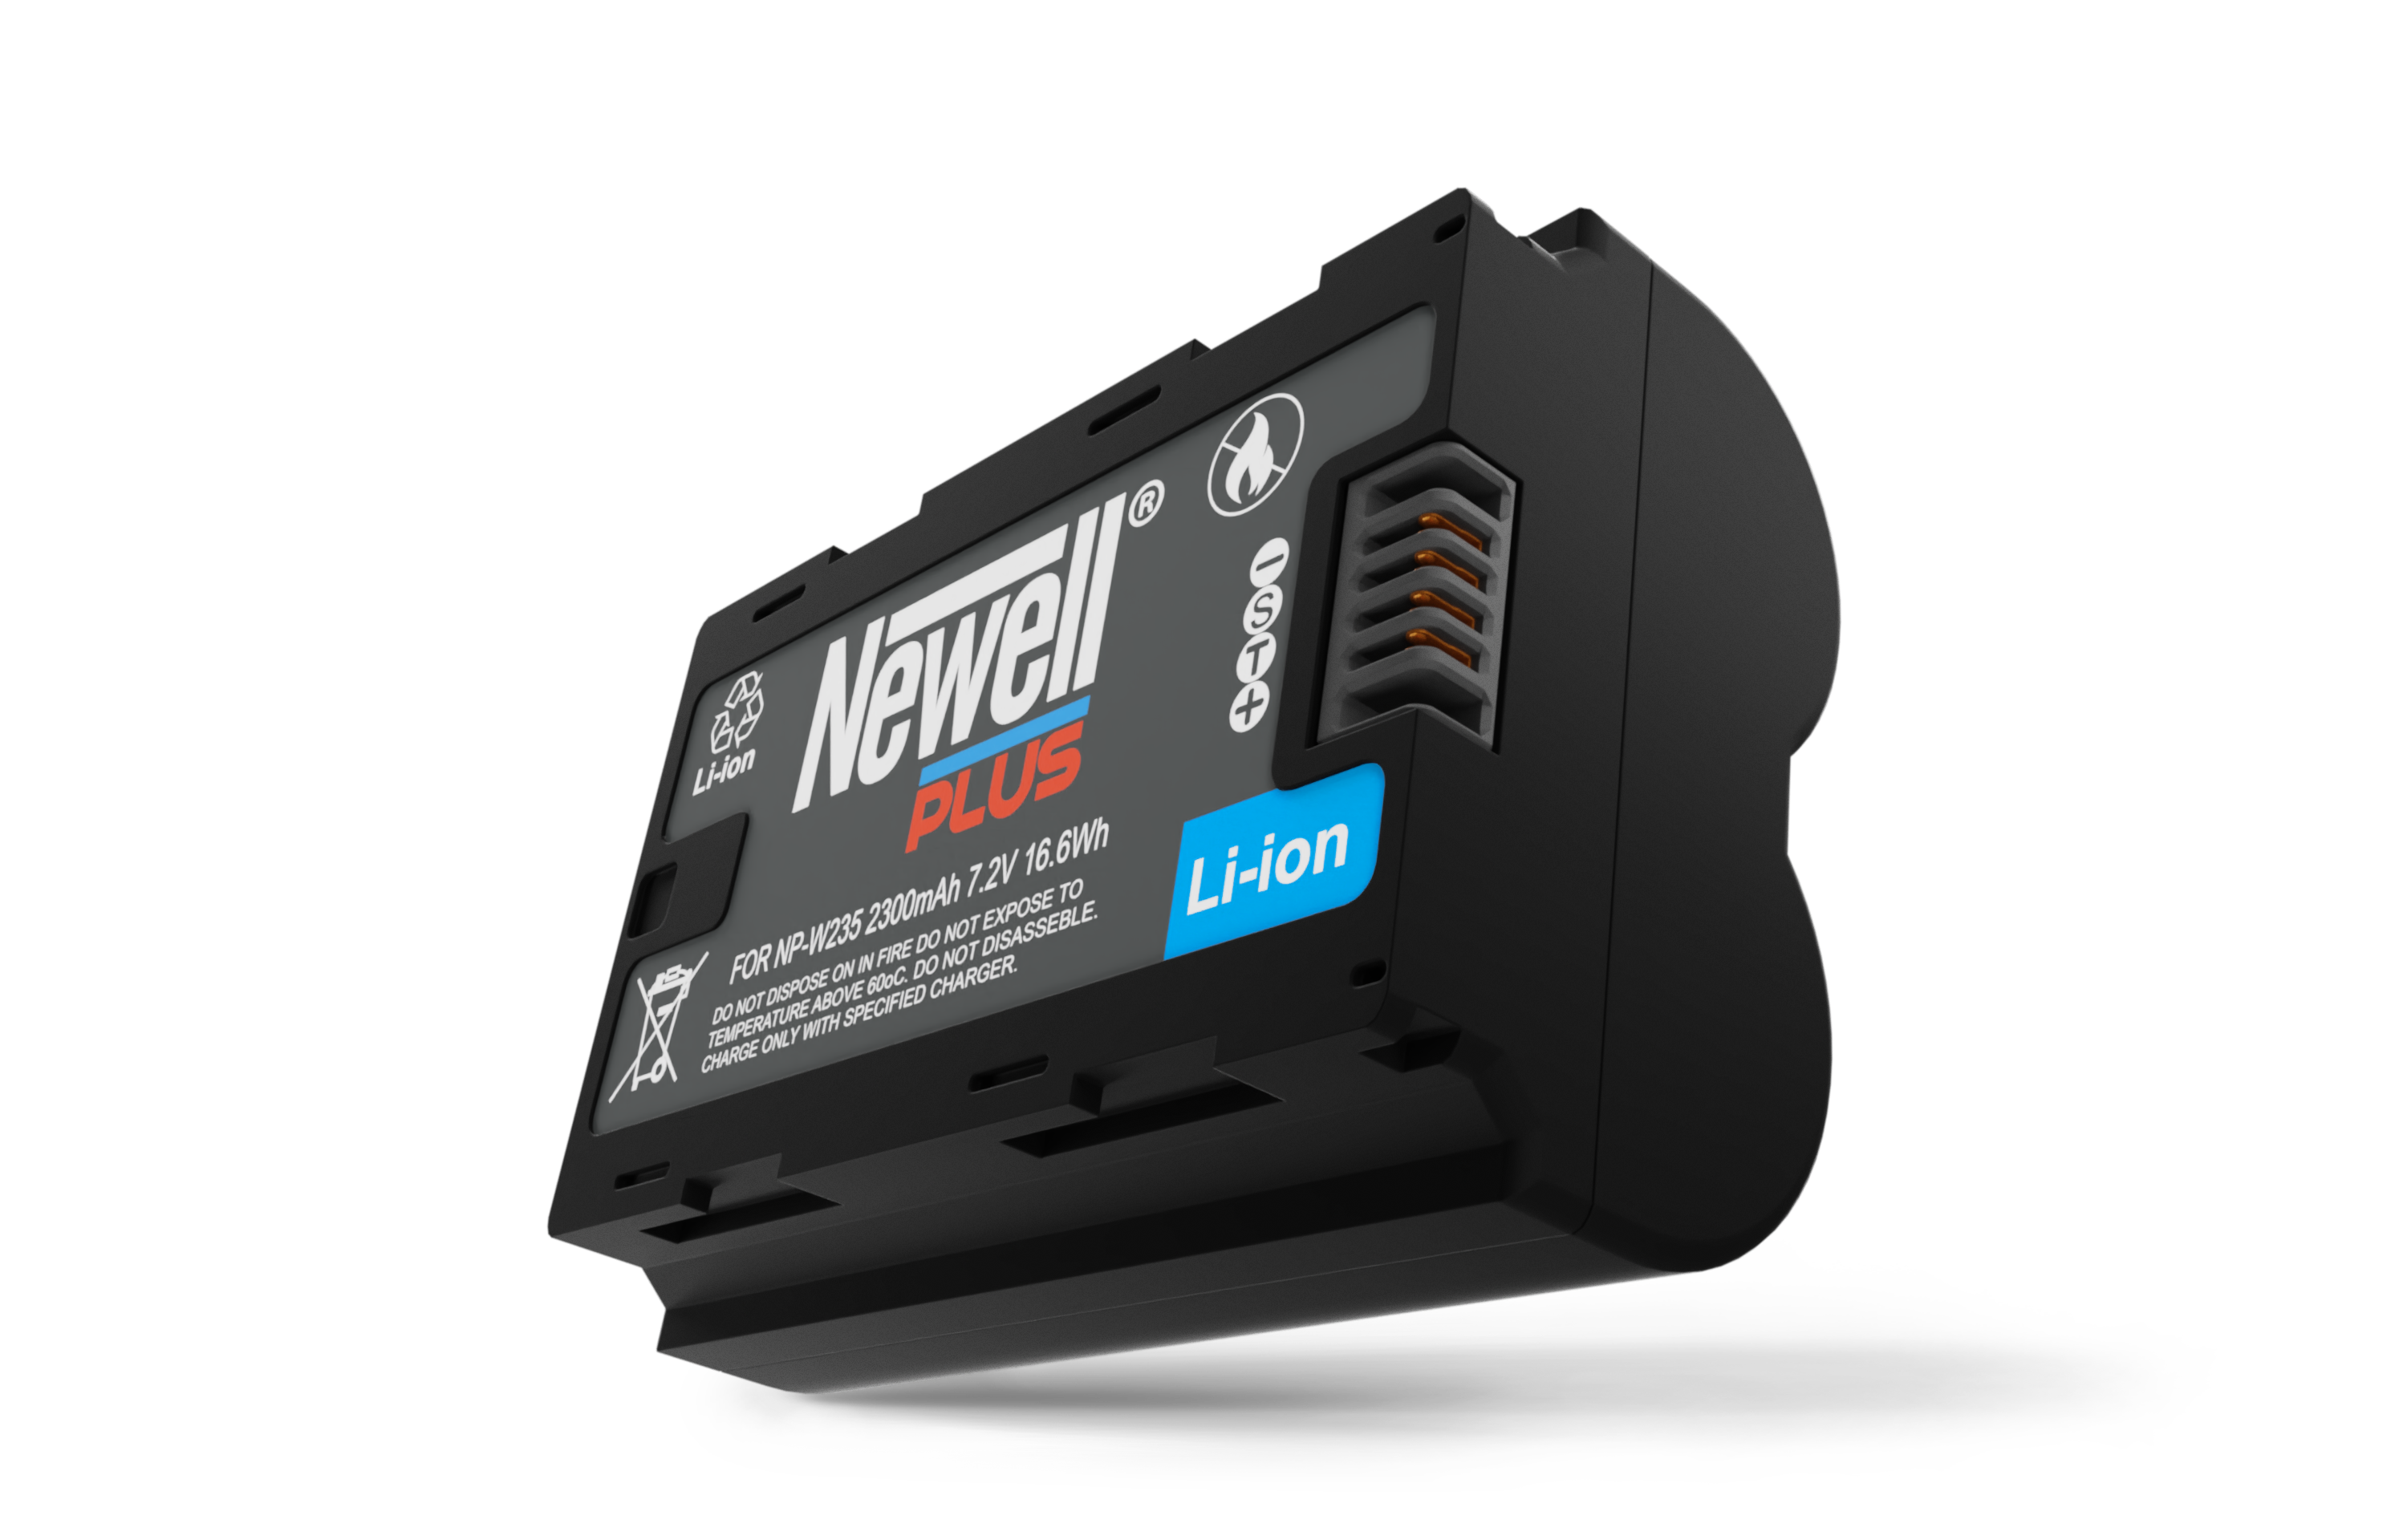 Batterie Newell PLUS NP-W235